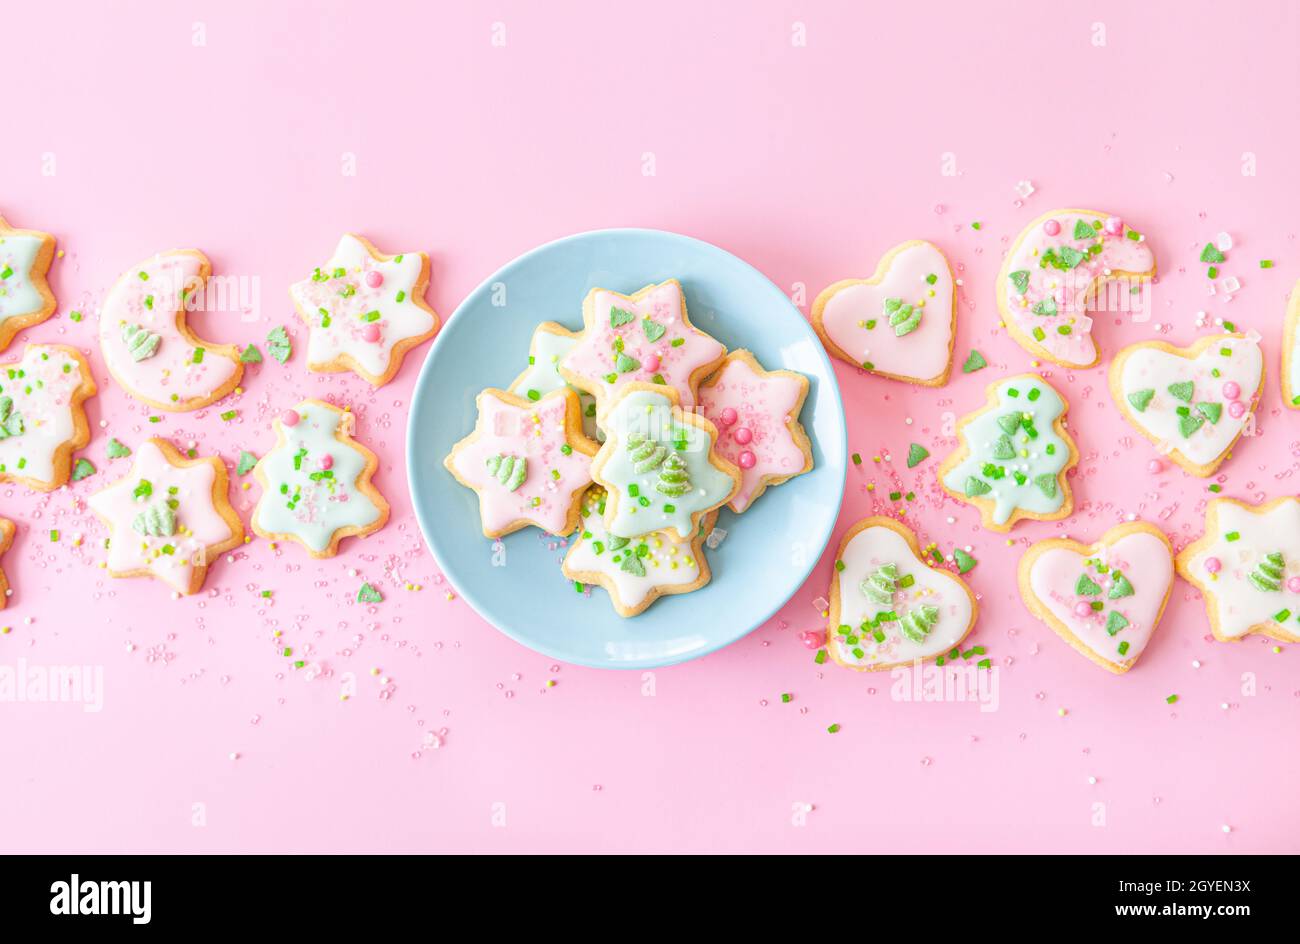 Colorful Christmas cookies with sugar sprinkles on a pink background Stock Photo